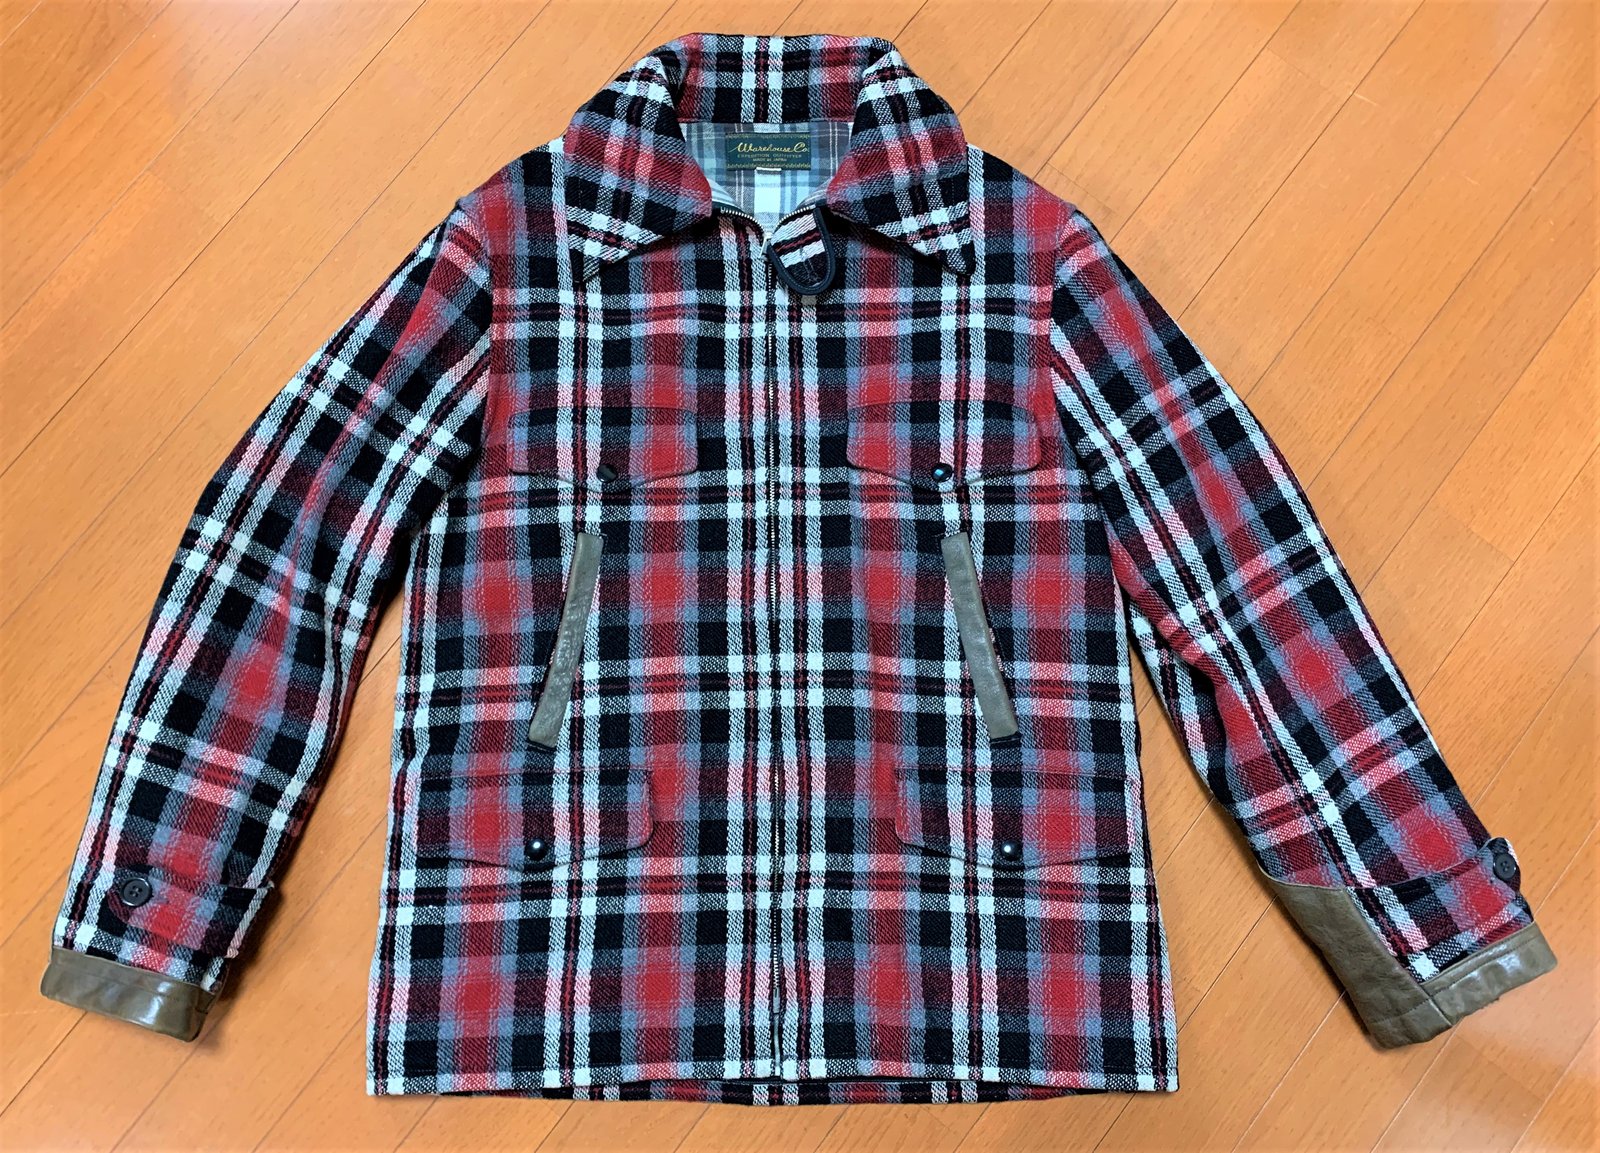 Warehouse Japan plaid wool hunting jacket with leather accents